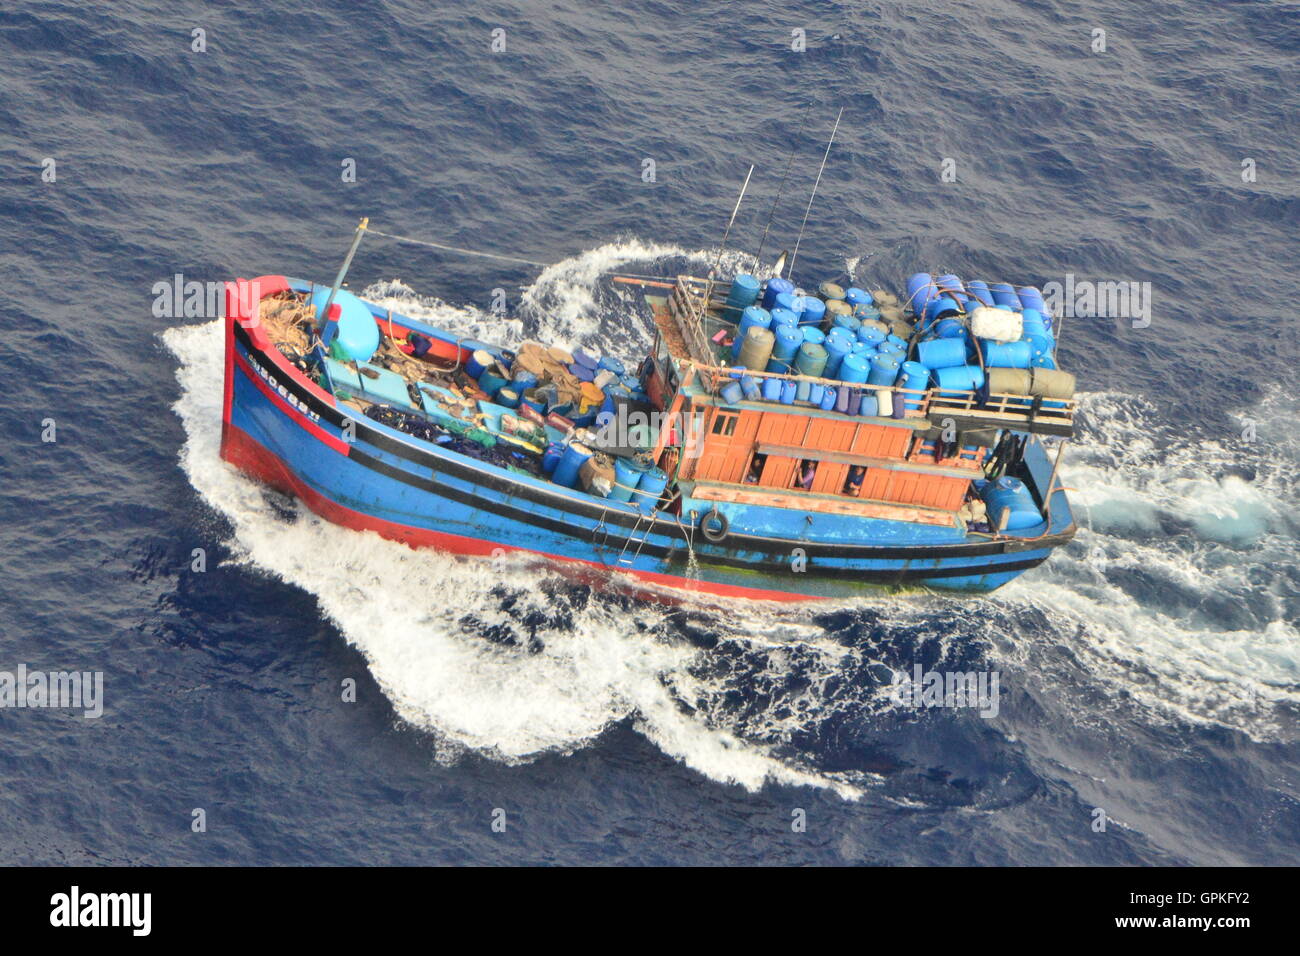 (160905) -- SYDNEY, Sept. 5, 2016 (Xinhua) -- An illegal foreign fishing vessel is seen at Dianne Bank, 250 nautical miles northeast of Cairns, Australia, Sept. 3, 2016. Maritime Border Command (MBC) within the Australian Border Force (ABF) and the Australian Fisheries Management Authority (AFMA) apprehended Saturday a foreign fishing vessel, believed to be Vietnamese, suspected of illegally fishing in Australian waters. The vessel was intercepted near Dianne Bank, approximately 250 nautical miles to the northeast of Cairns, and 136 nautical miles within Australia's fishing zone. The vessel an Stock Photo